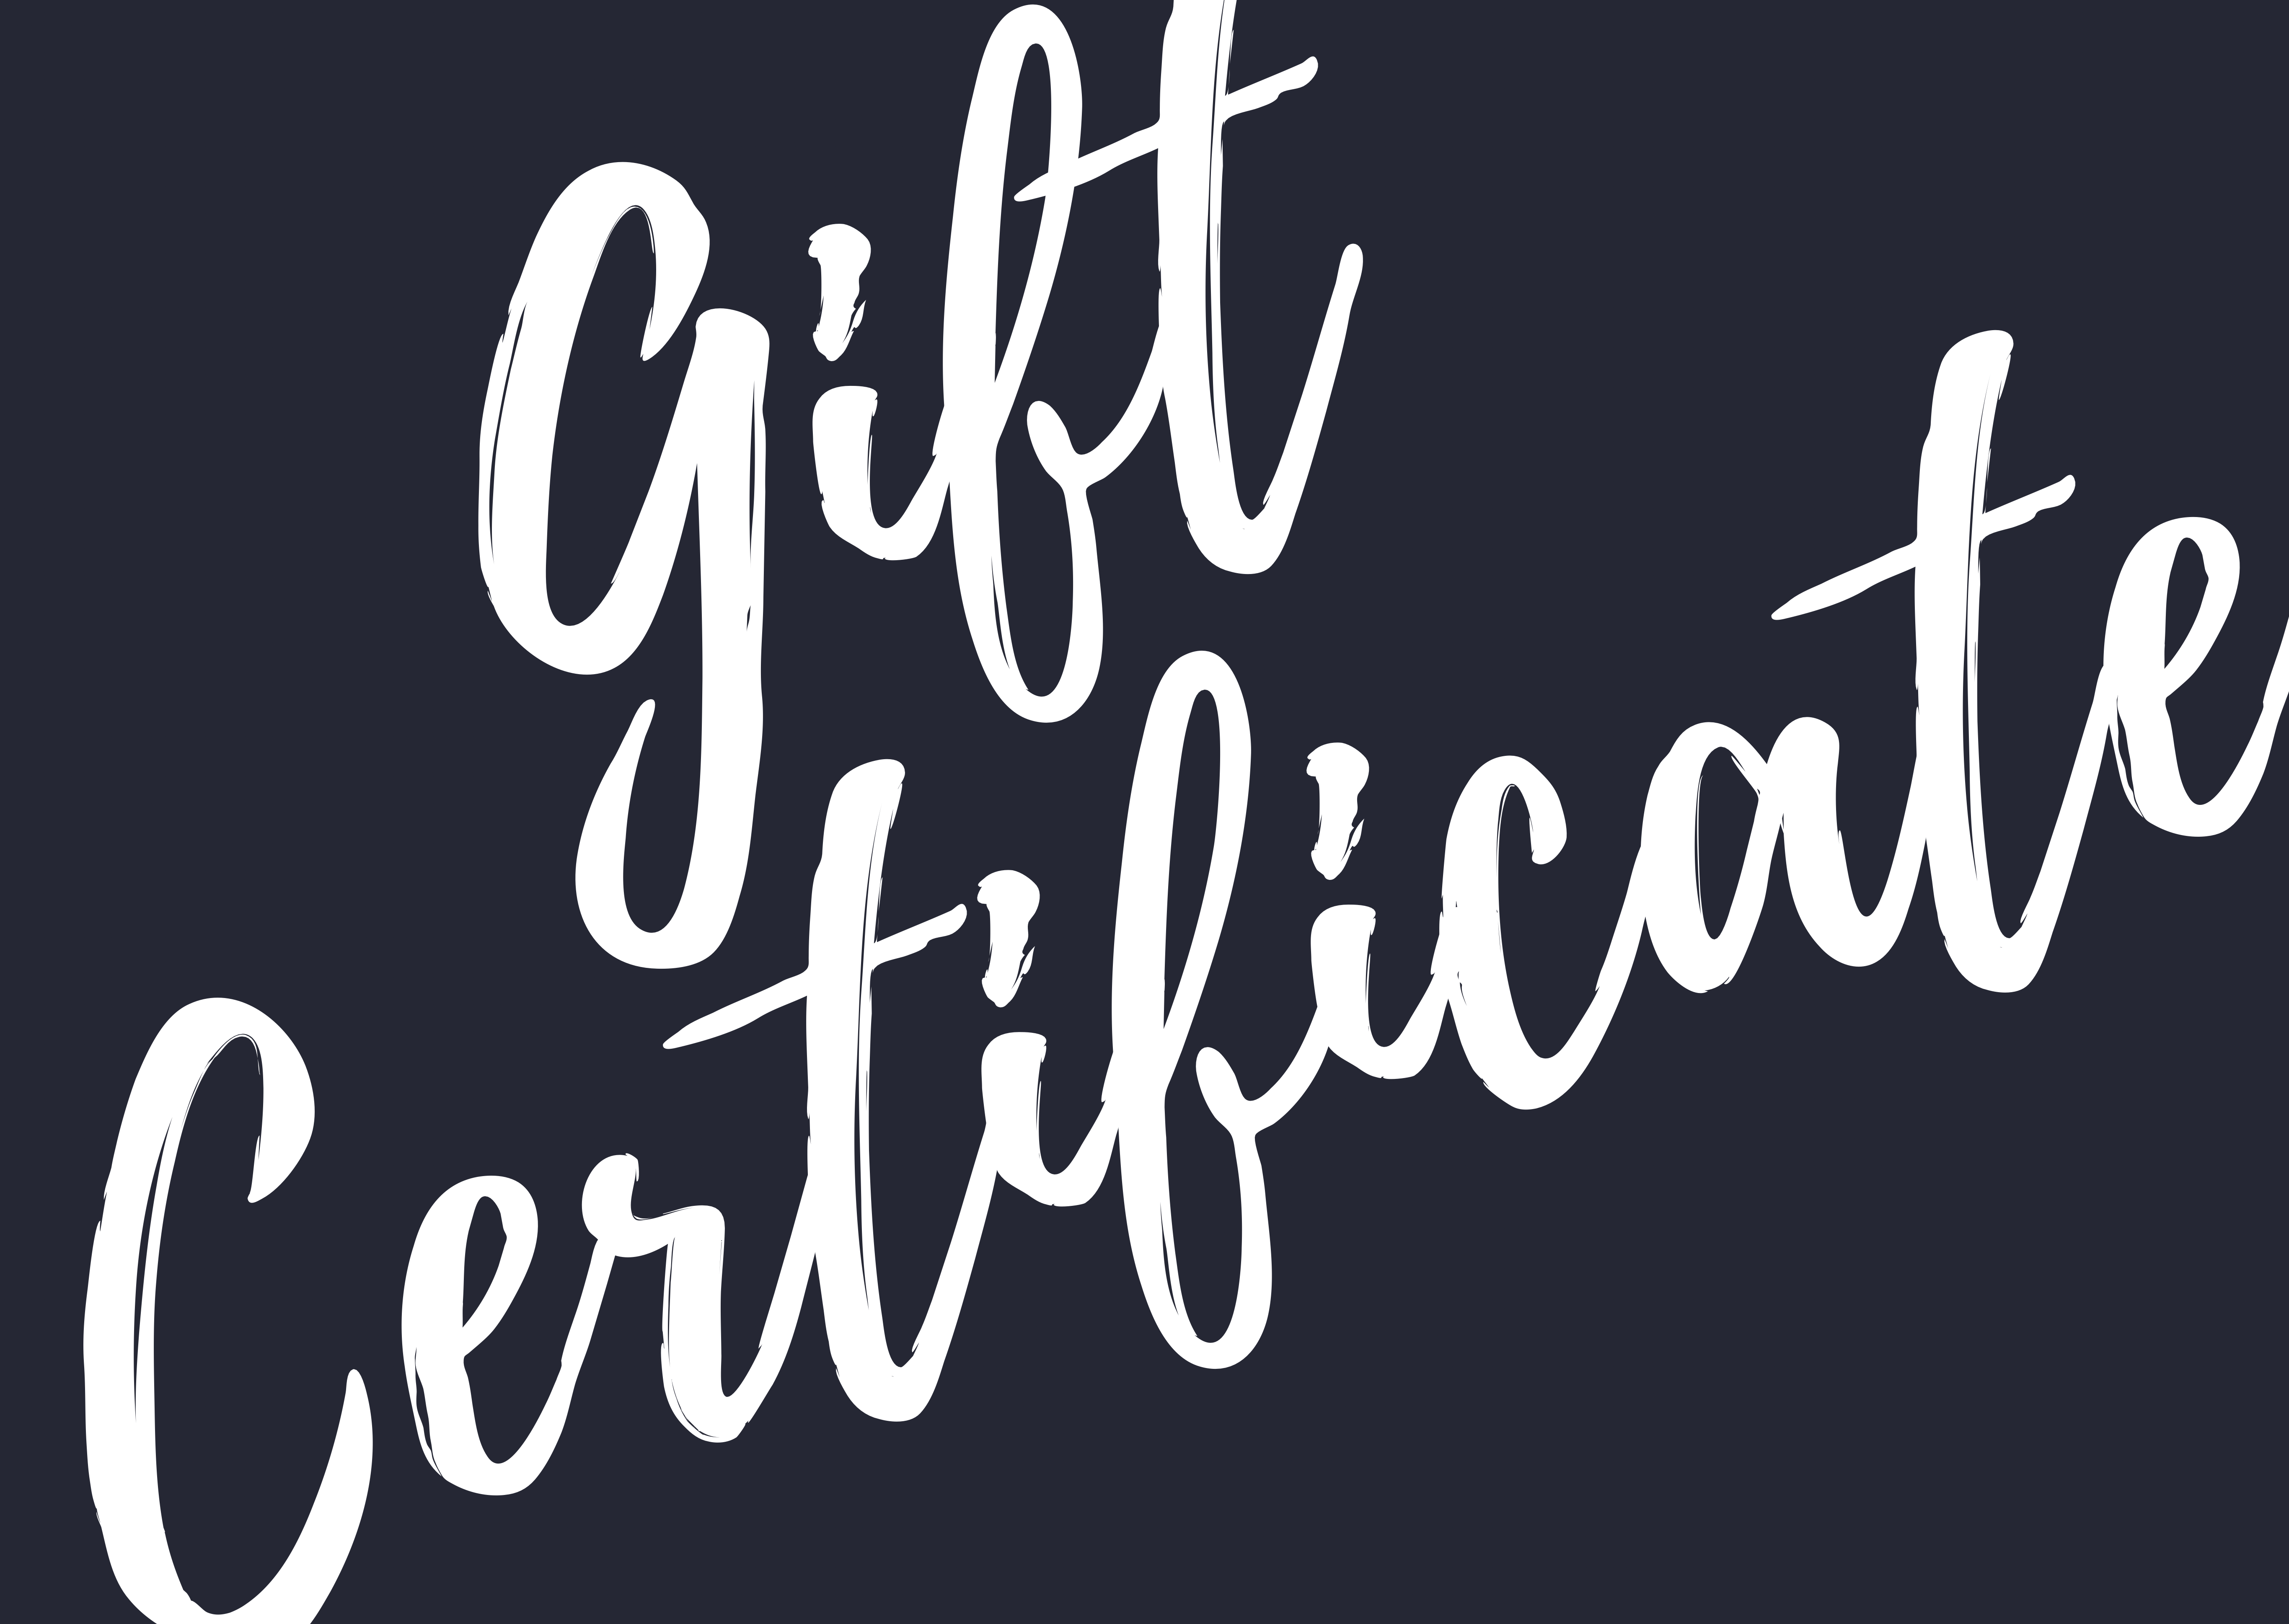 IN-STORE GIFT CERTIFICATES – Ambiance SF